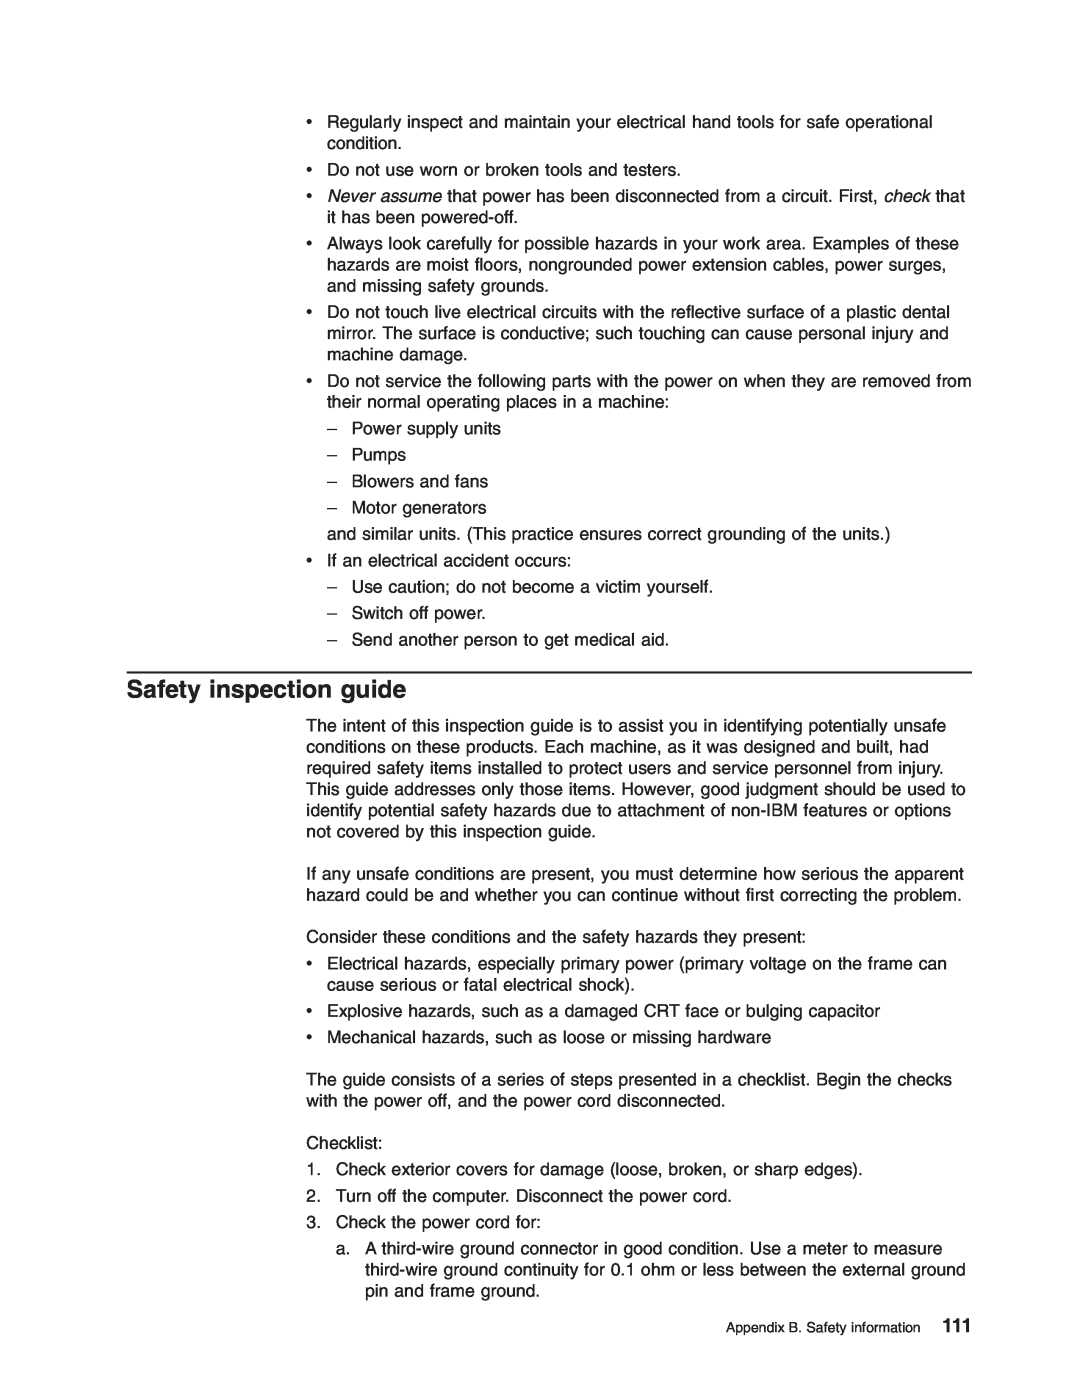 IBM HS40 manual Safety inspection guide 